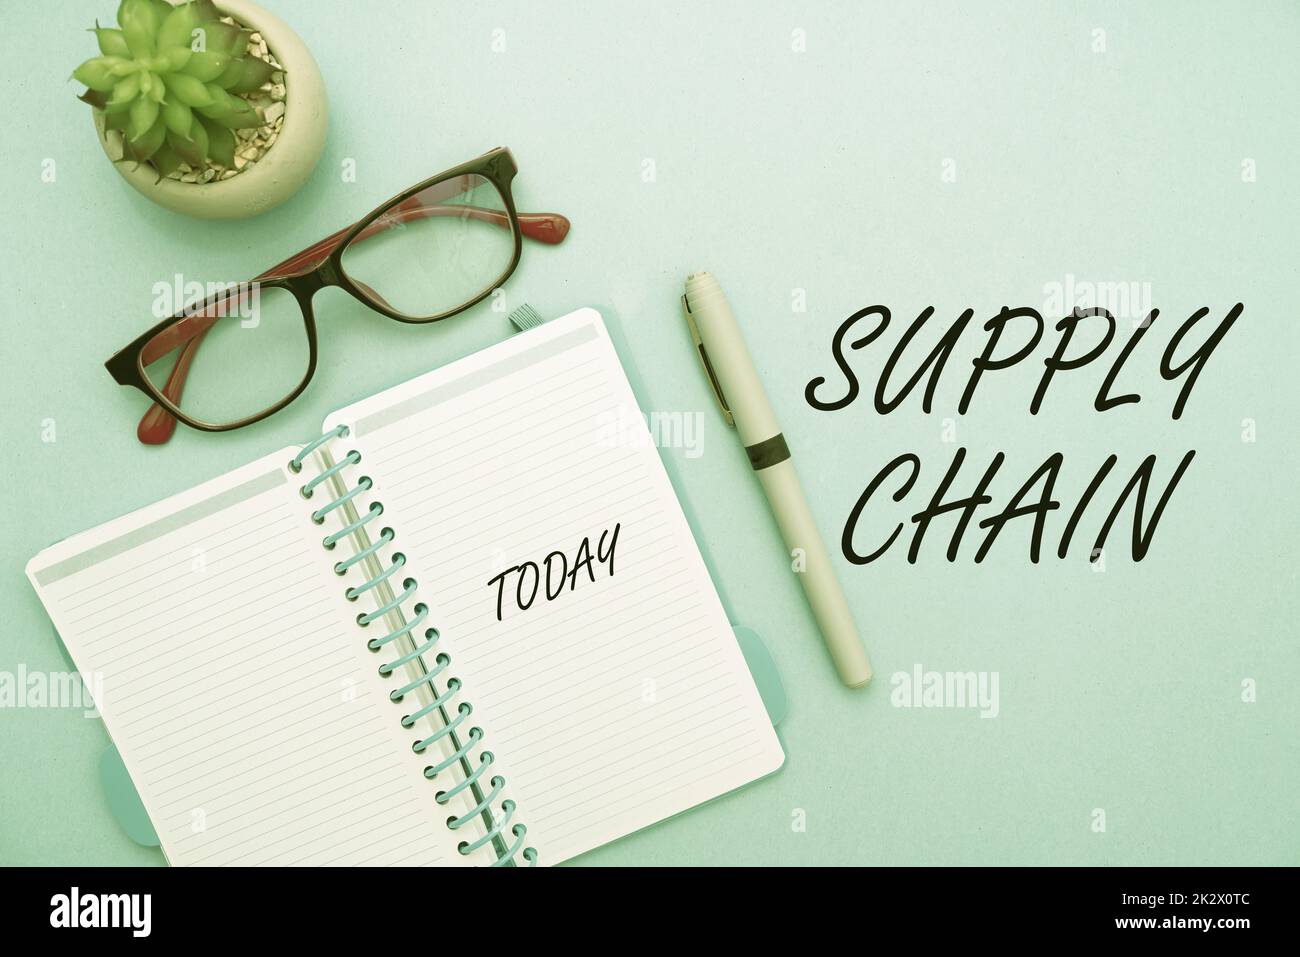 Writing displaying text Supply Chain. Concept meaning System of organization and processes from supplier to consumer Flashy School Office Supplies, Teaching Learning Collections, Writing Tools Stock Photo